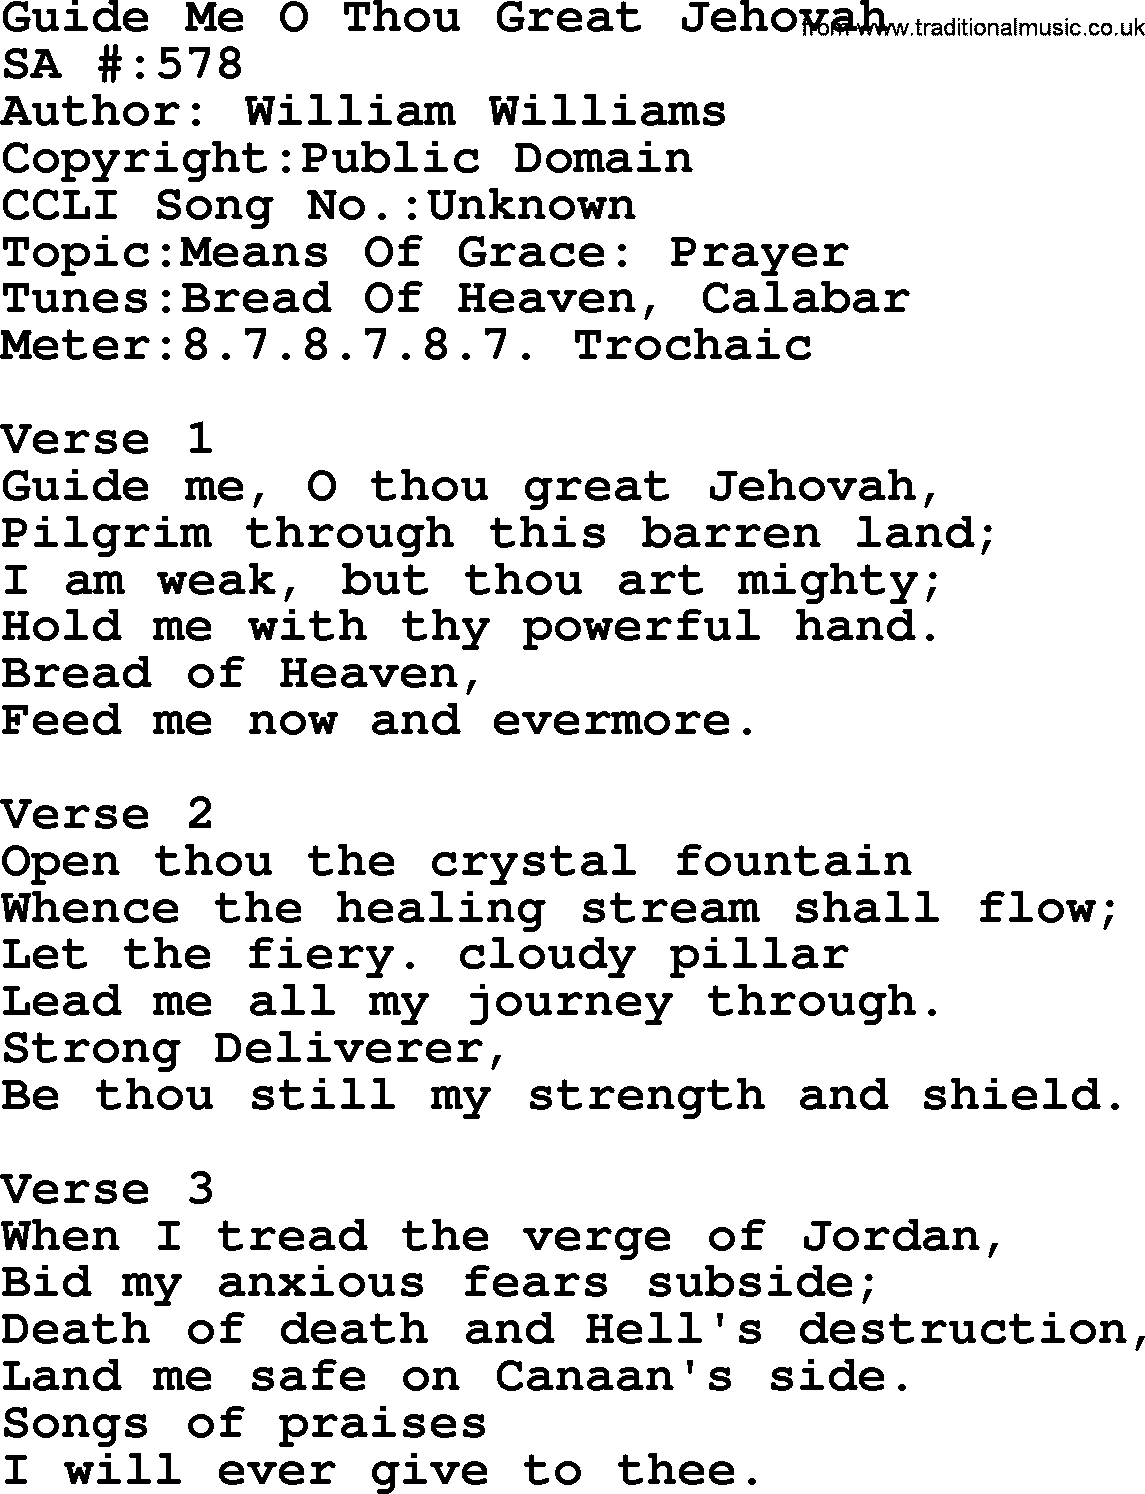 Salvation Army Hymnal, title: Guide Me O Thou Great Jehovah, with lyrics and PDF,